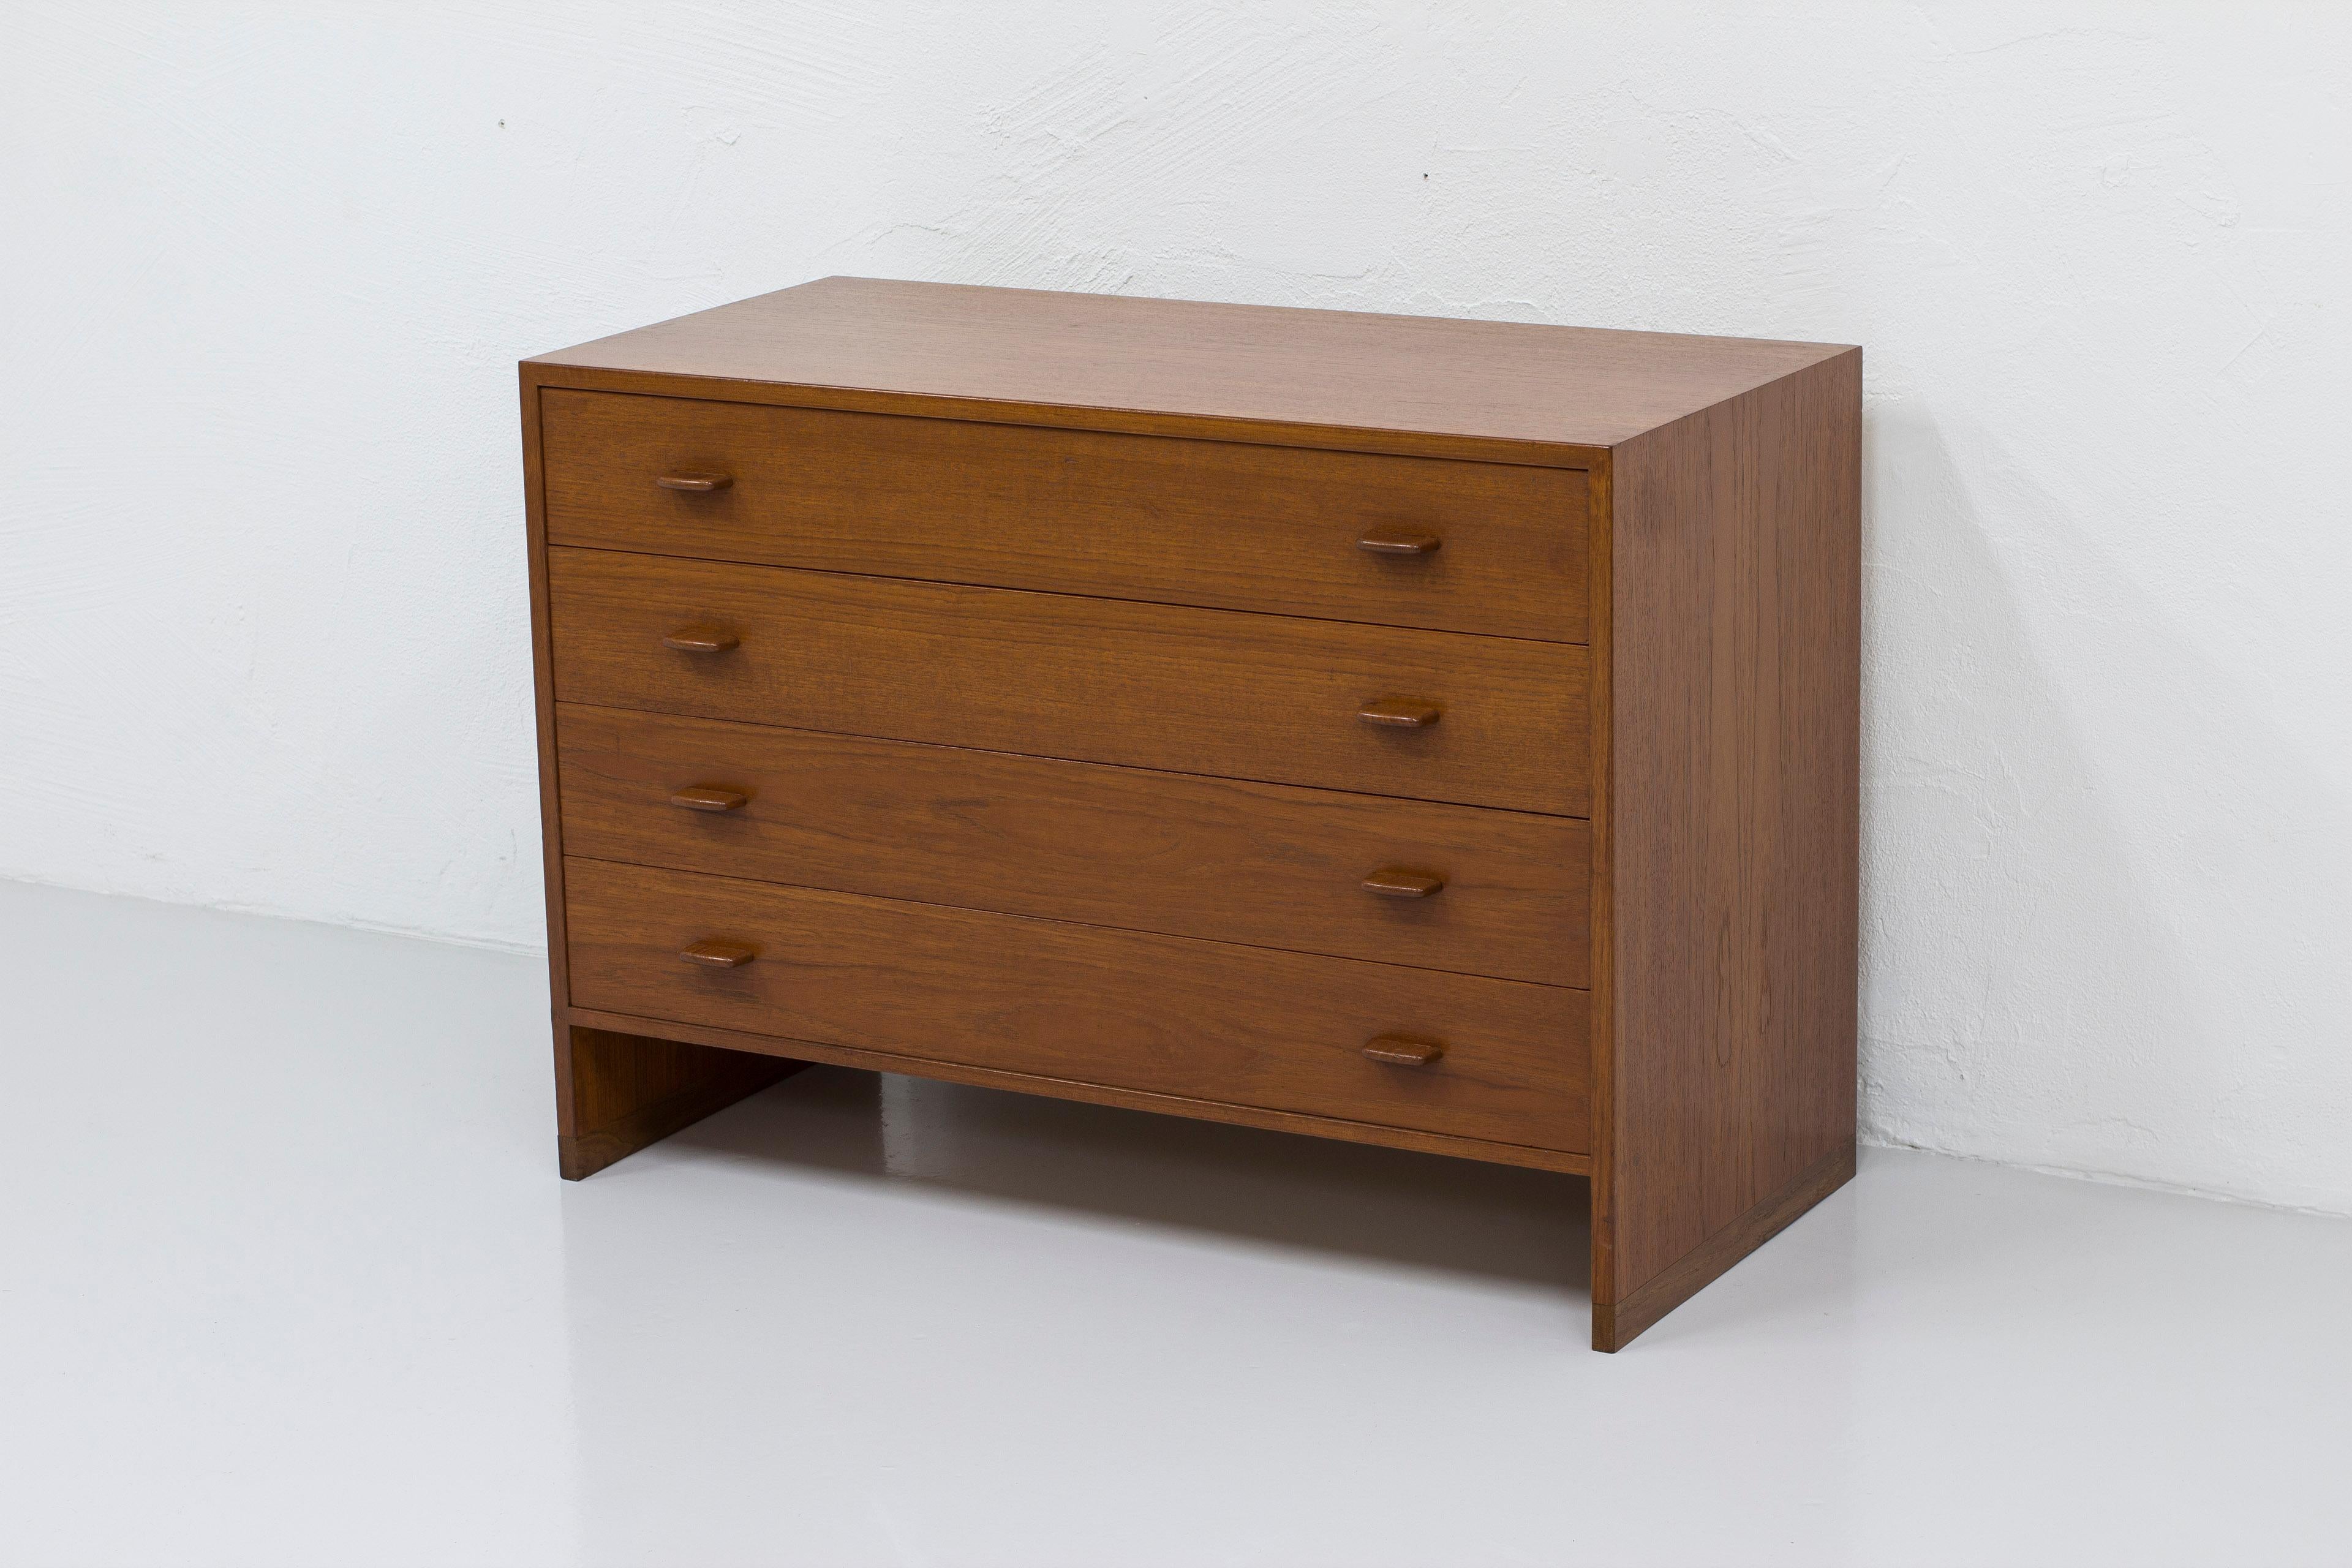 Chest of drawers model RY16 designed by Hans J. Wegner. Produced by RY Møbler during the 1950s. Made from teak with oak runners and oak dowel details. Inside of drawers made from light beech. Good vintage condition with age related wear and patina.